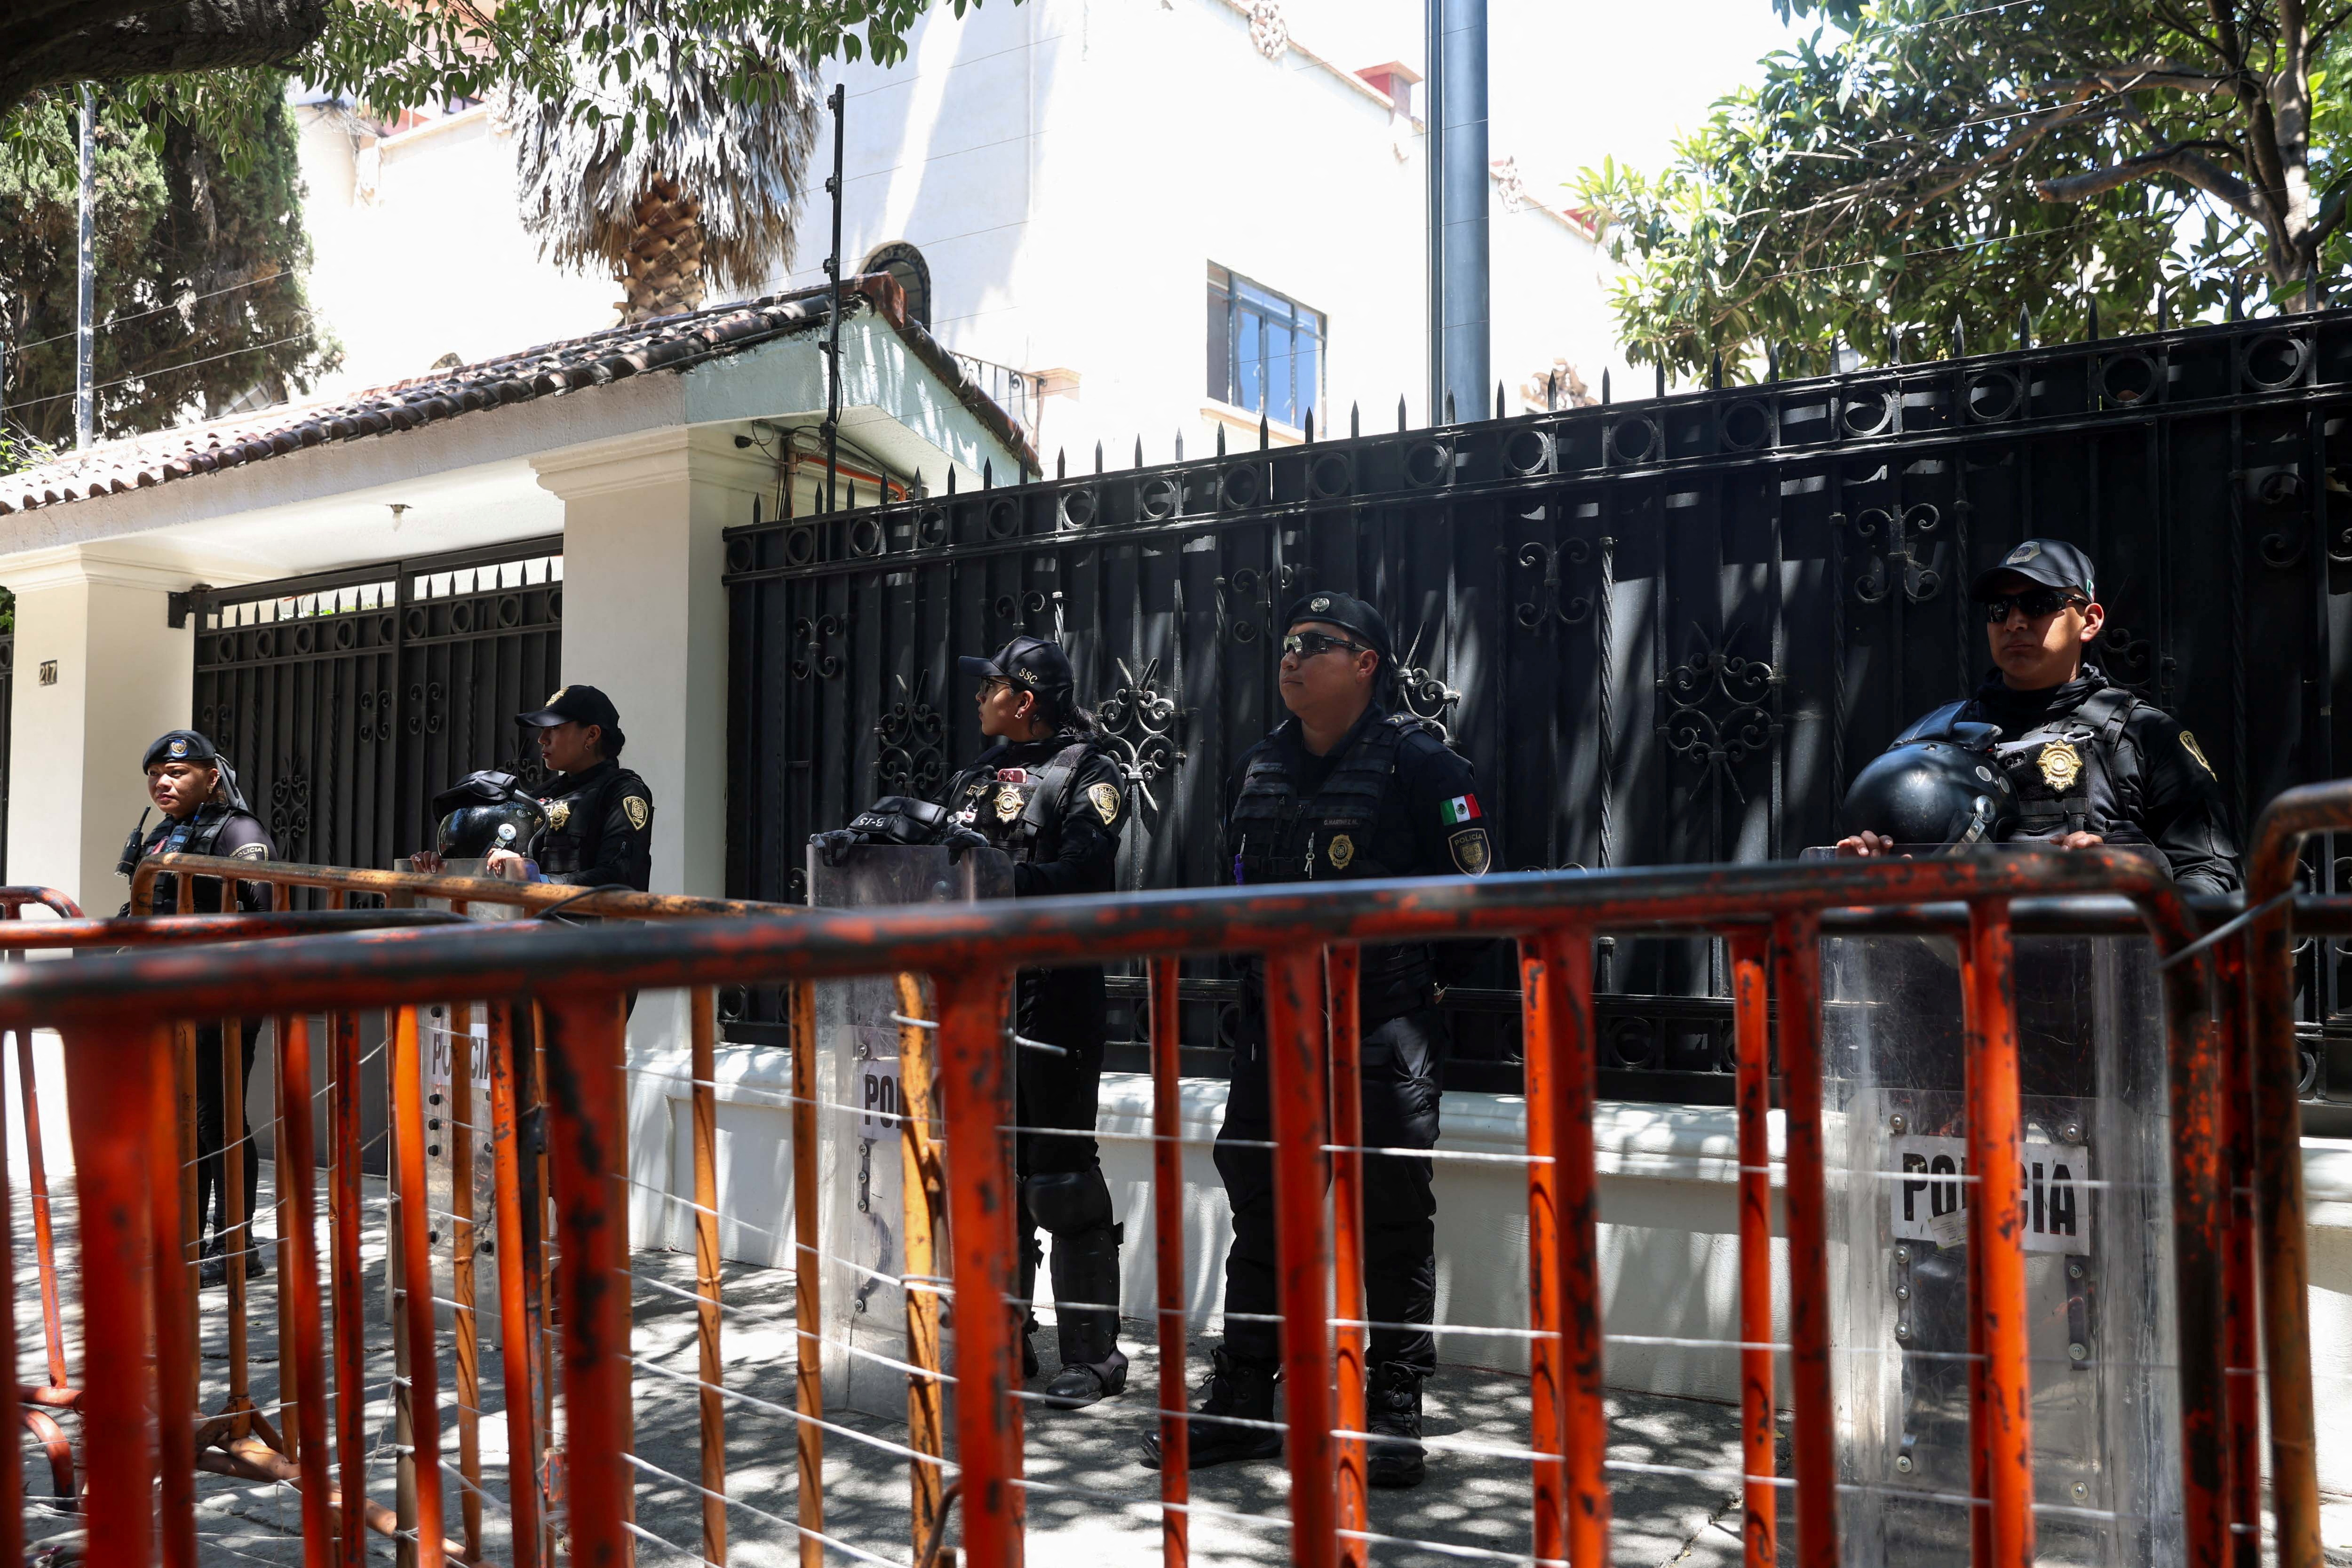 Police officer stand watch outside the Ecuadorean embassy in Mexico City after Ecuadorean authorities arrested former Vice President Jorge Glas